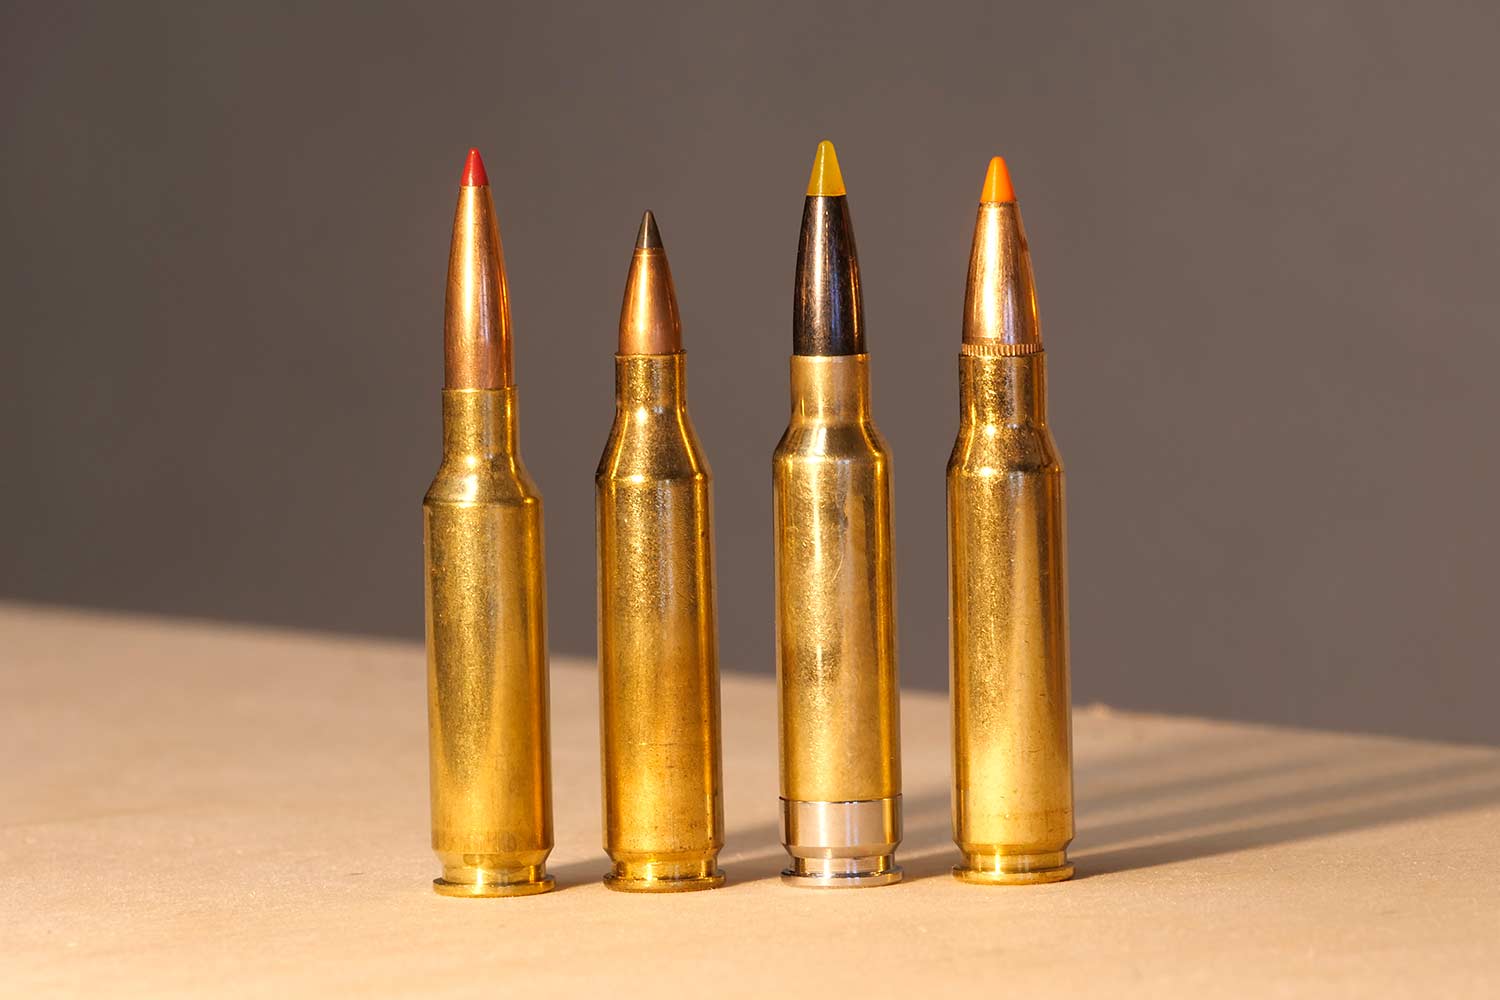 A lineup of 4 rifle ammo cartridges.